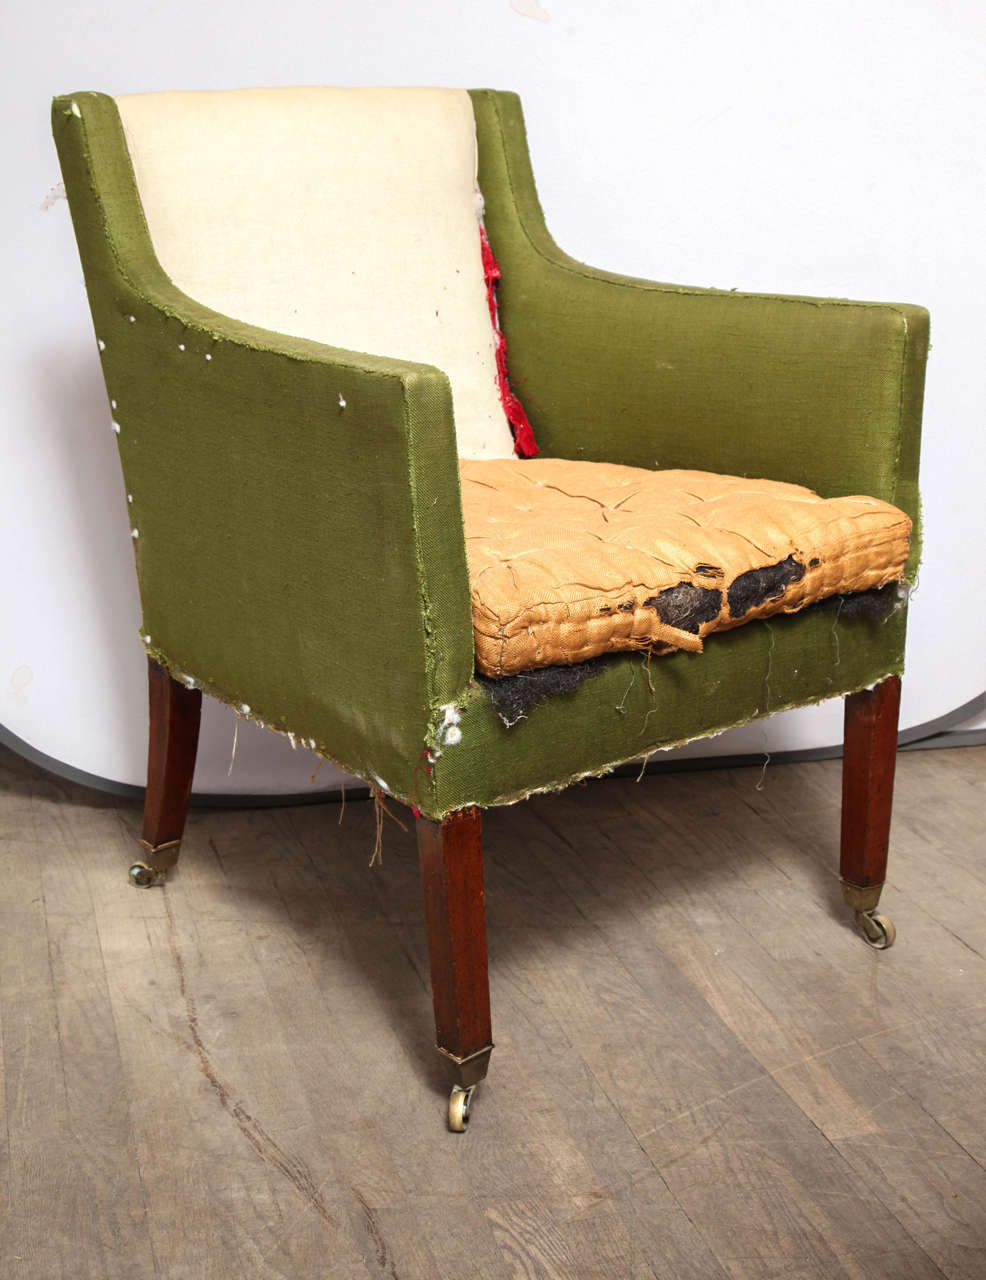 A rare and unique 19th C. Library chair from C. 1810-1820. This Chair stands in its original condition in 100% functional condition. This piece requires upholstery or can remain as is in original condition. 

This chair was sourced from an